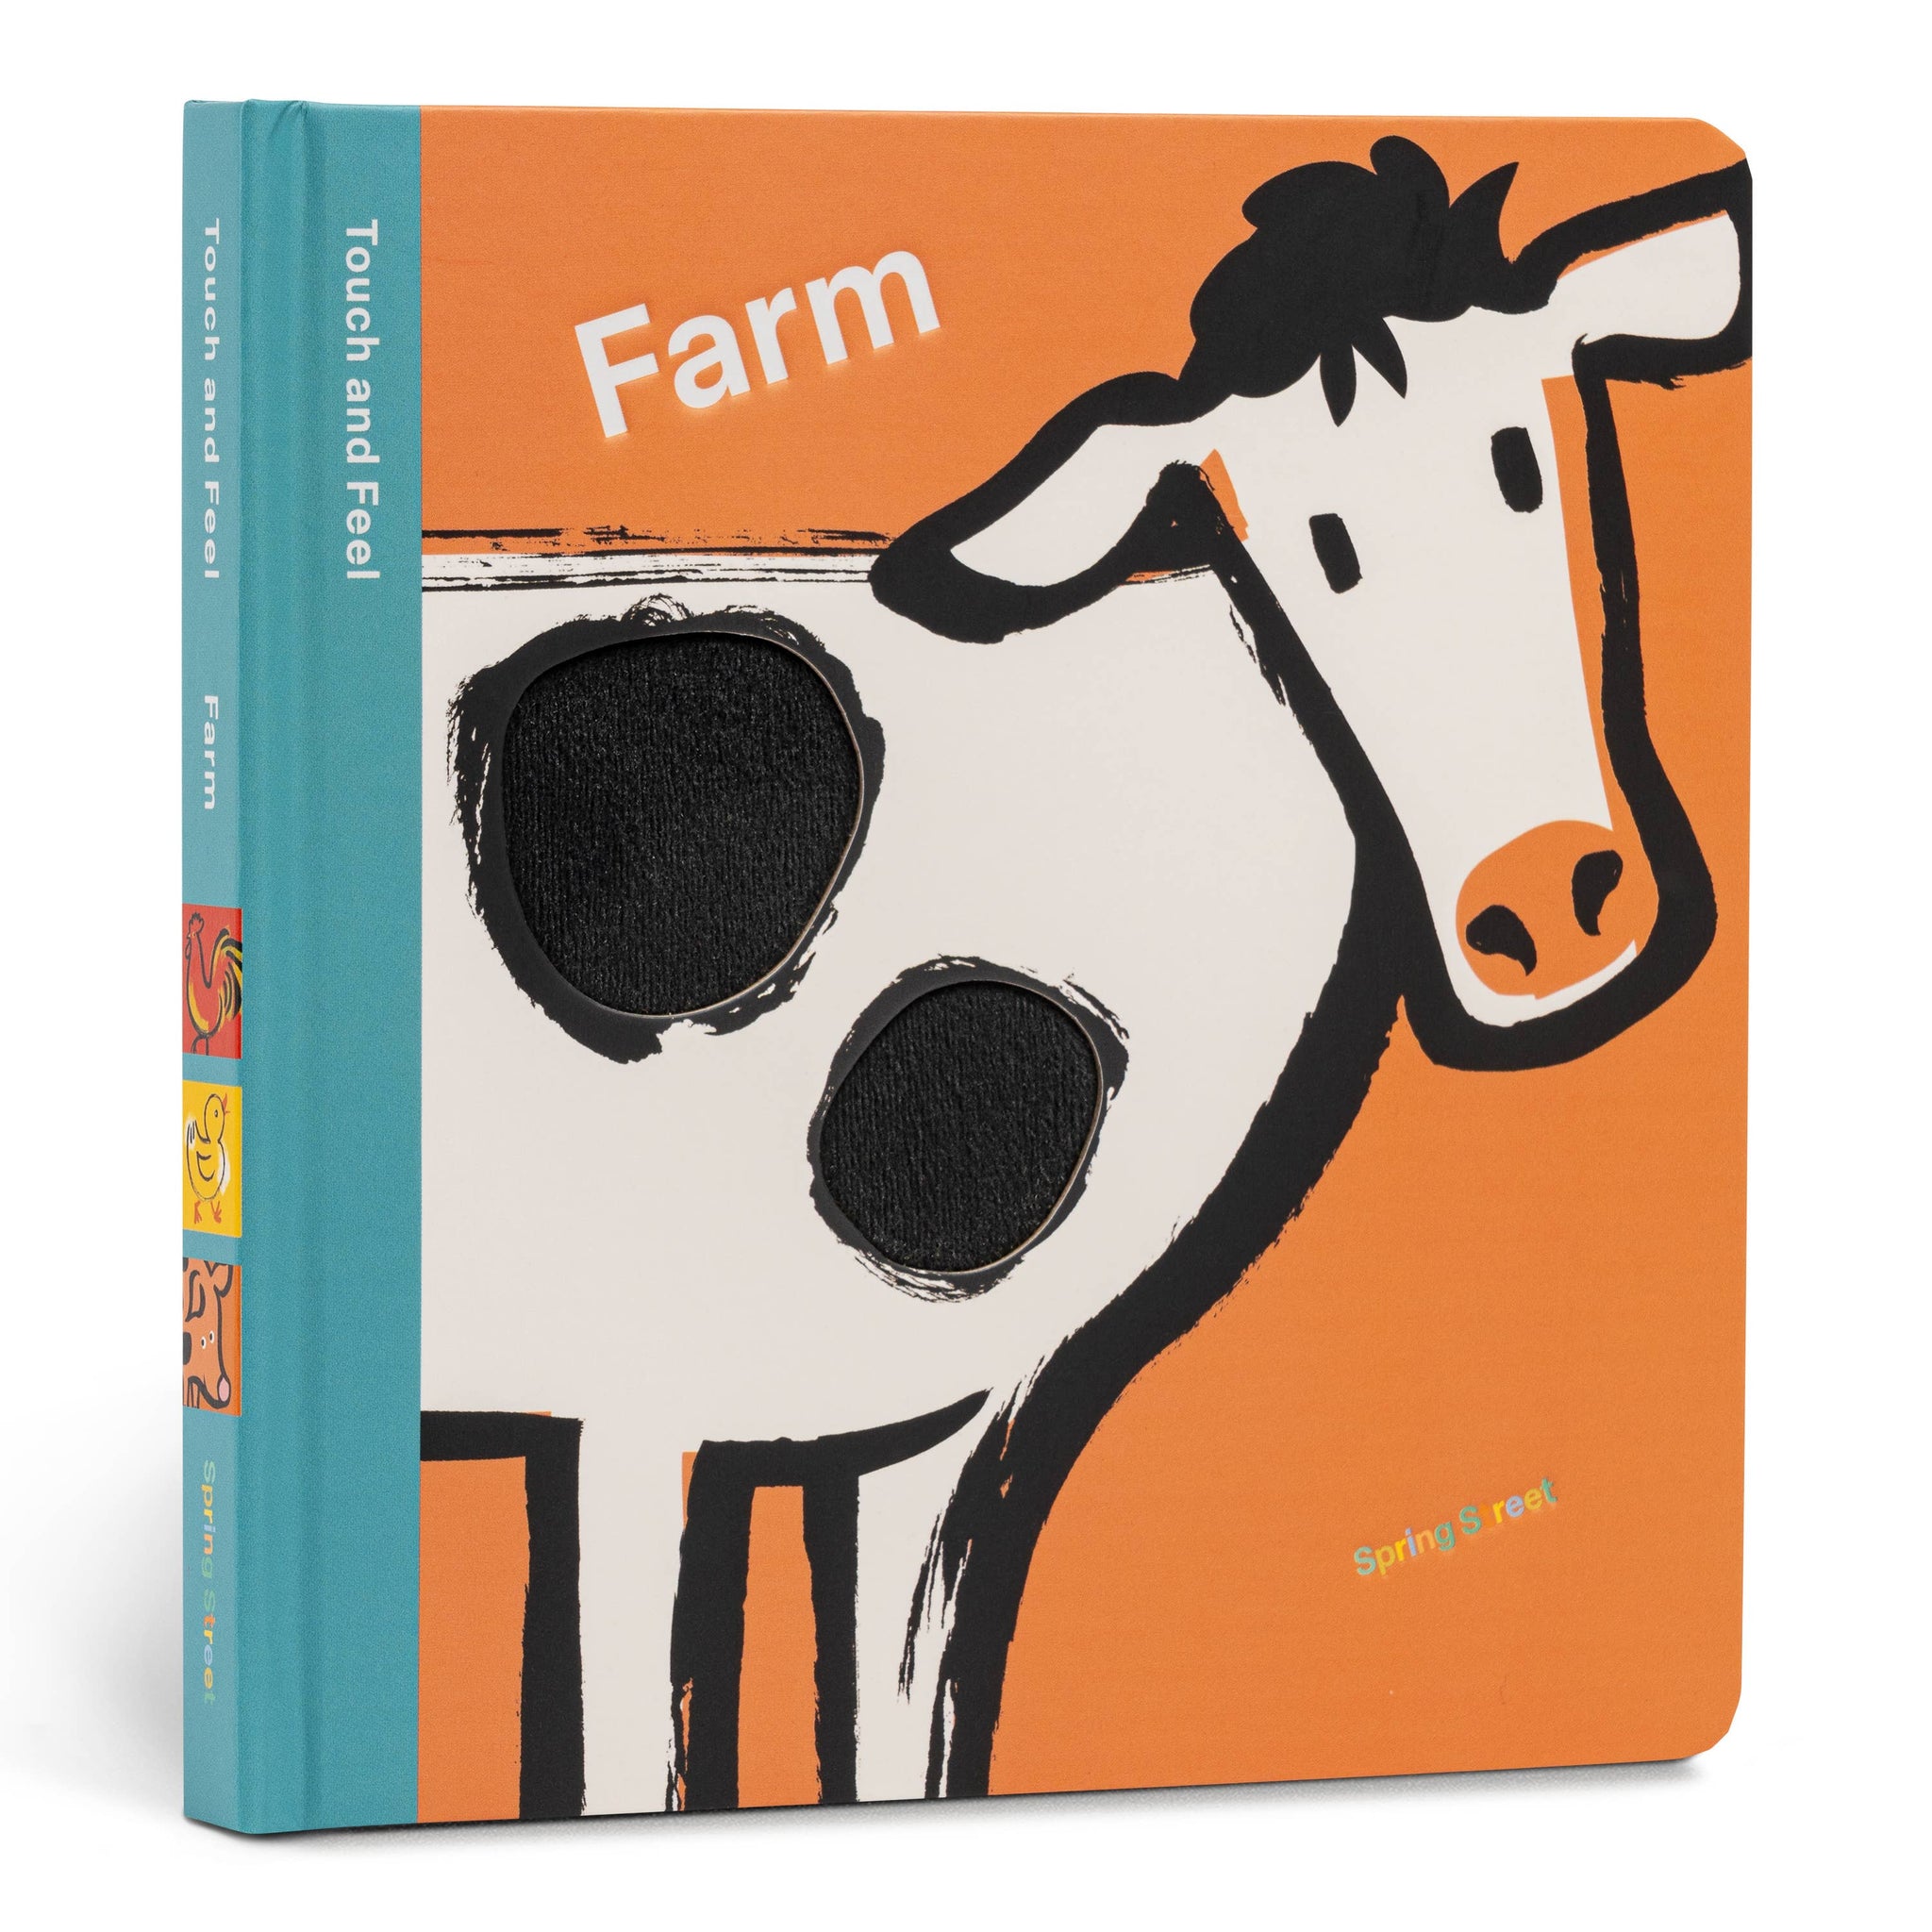 Spring Street Touch and Feel: Farm by Boxer Books